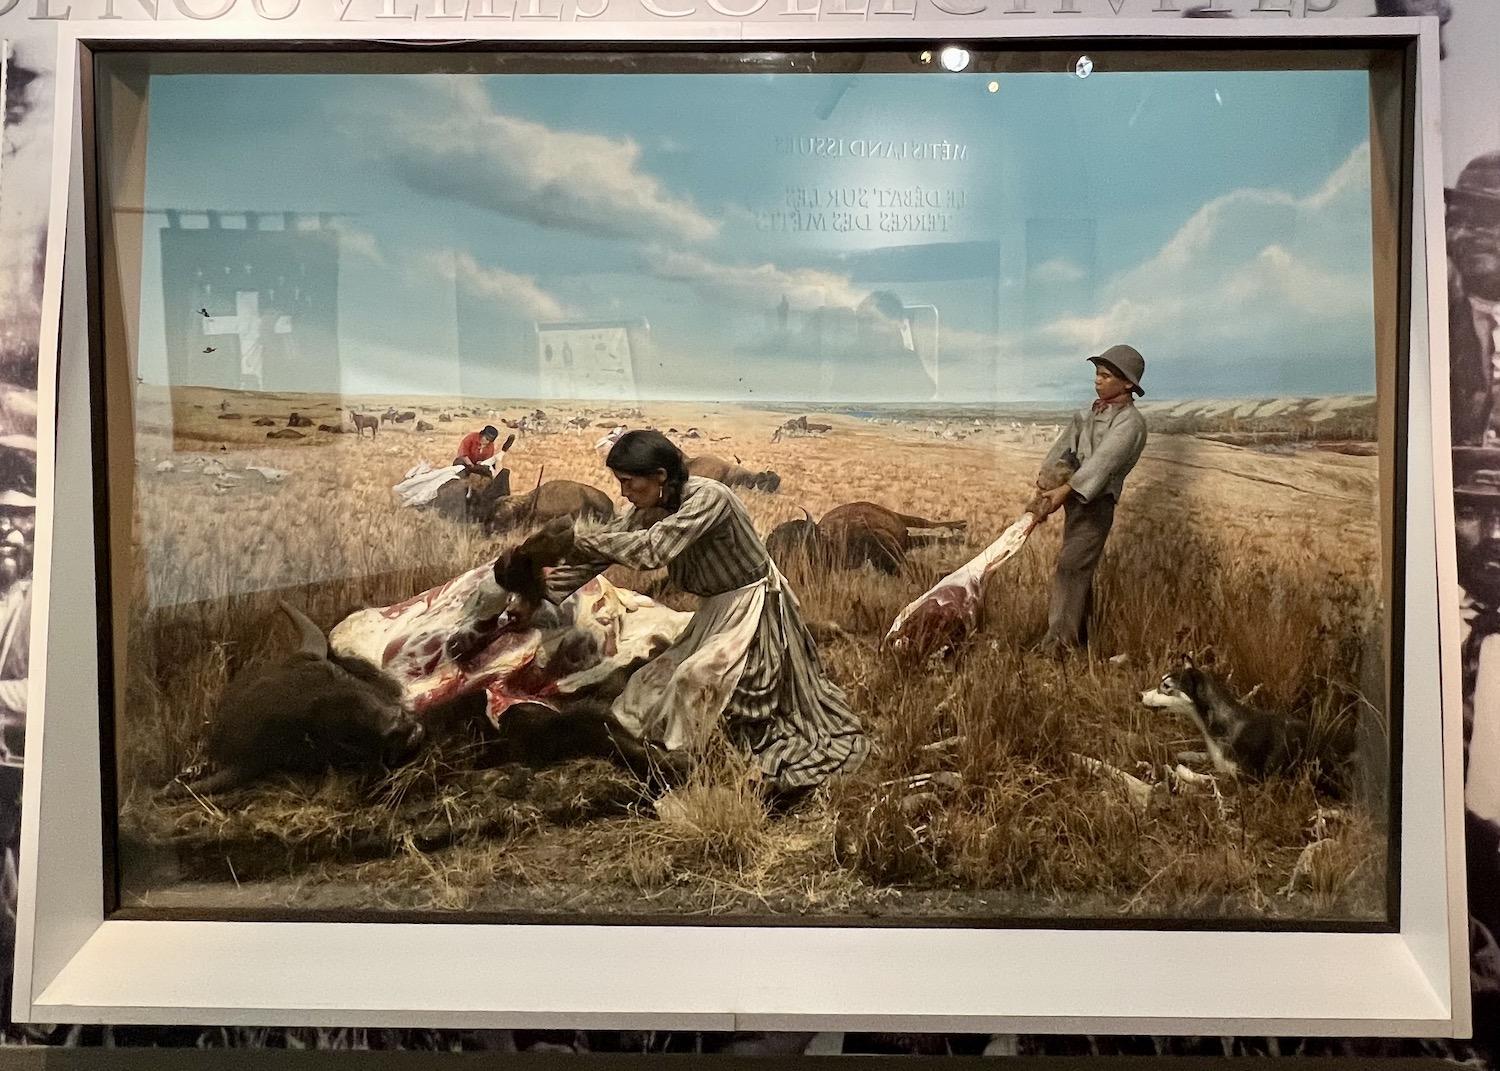 In the visitor center museum, a diorama shows Métis life during the buffalo hunt.